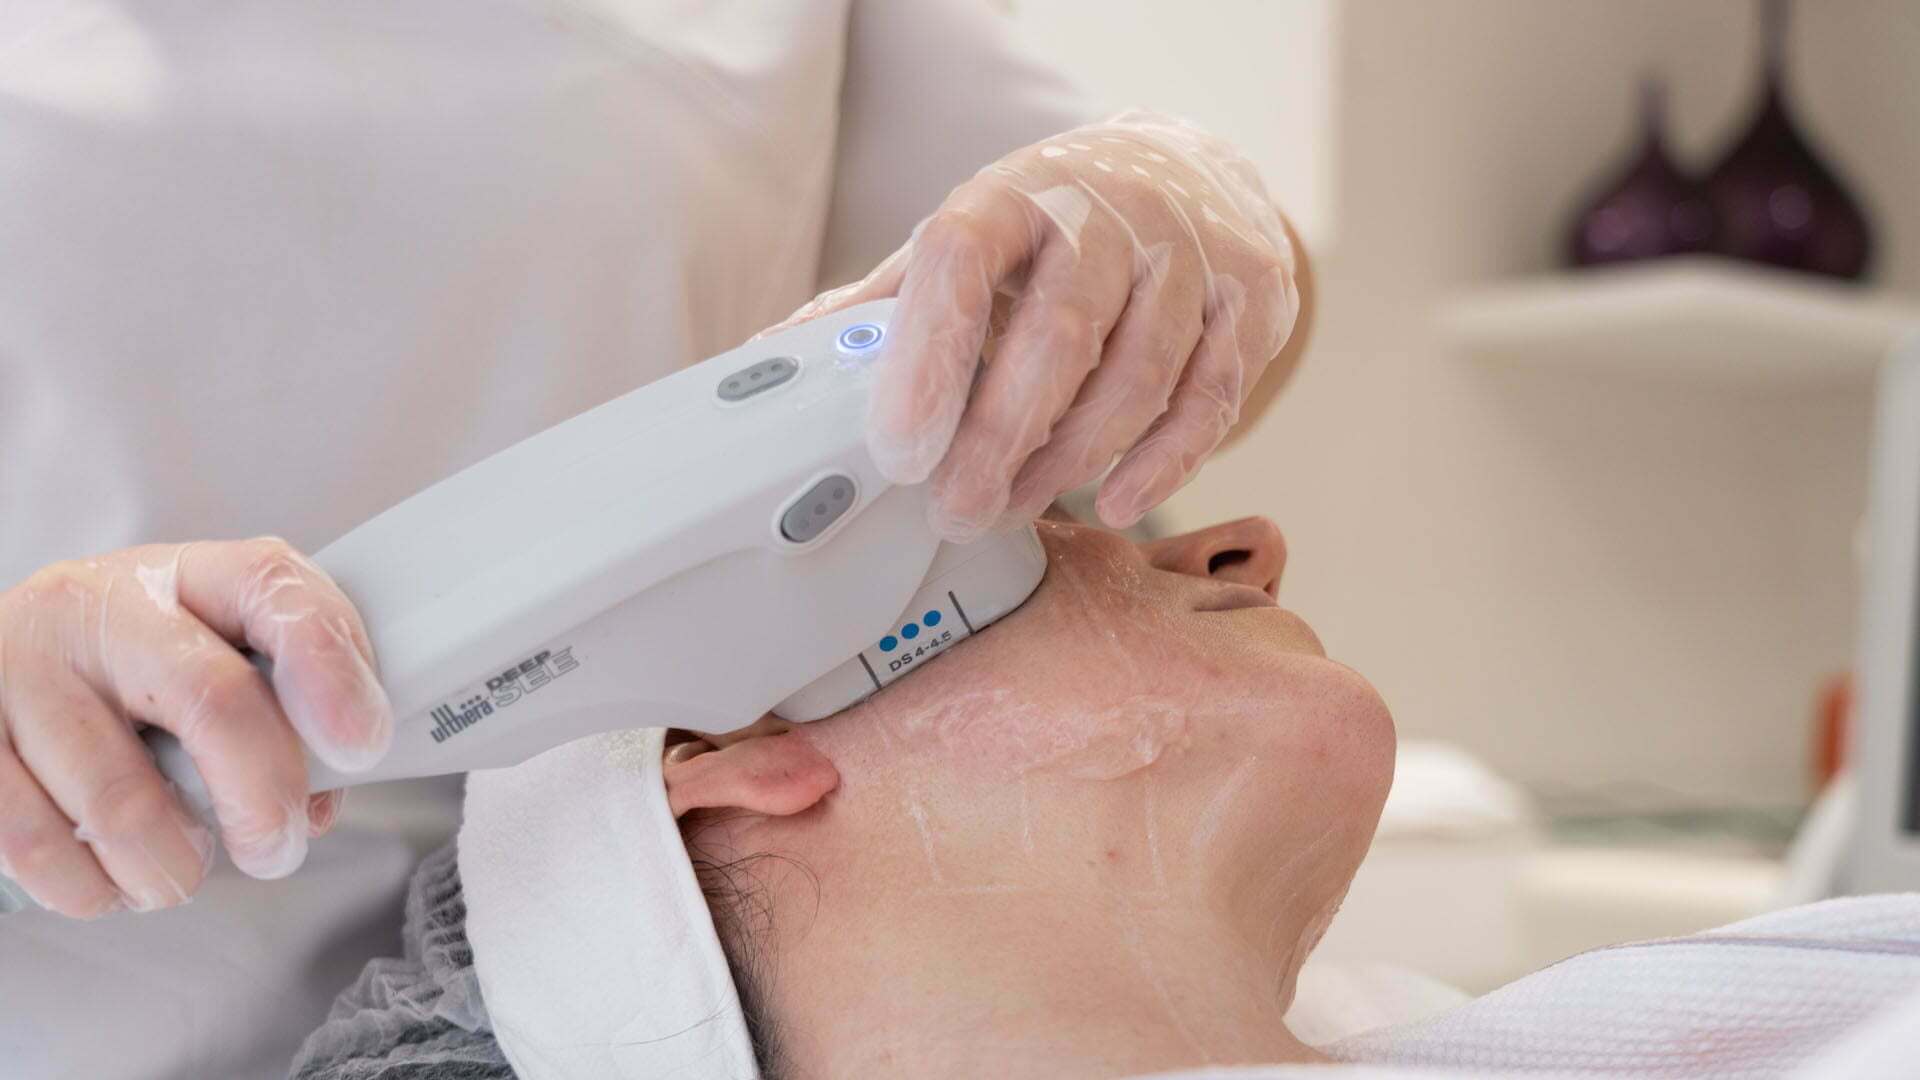 Ultherapy, groundbreaking facial skin lifting and firming - restore your youthful plump and tight facial skin with the safe and non-invasive ultrasound energy.